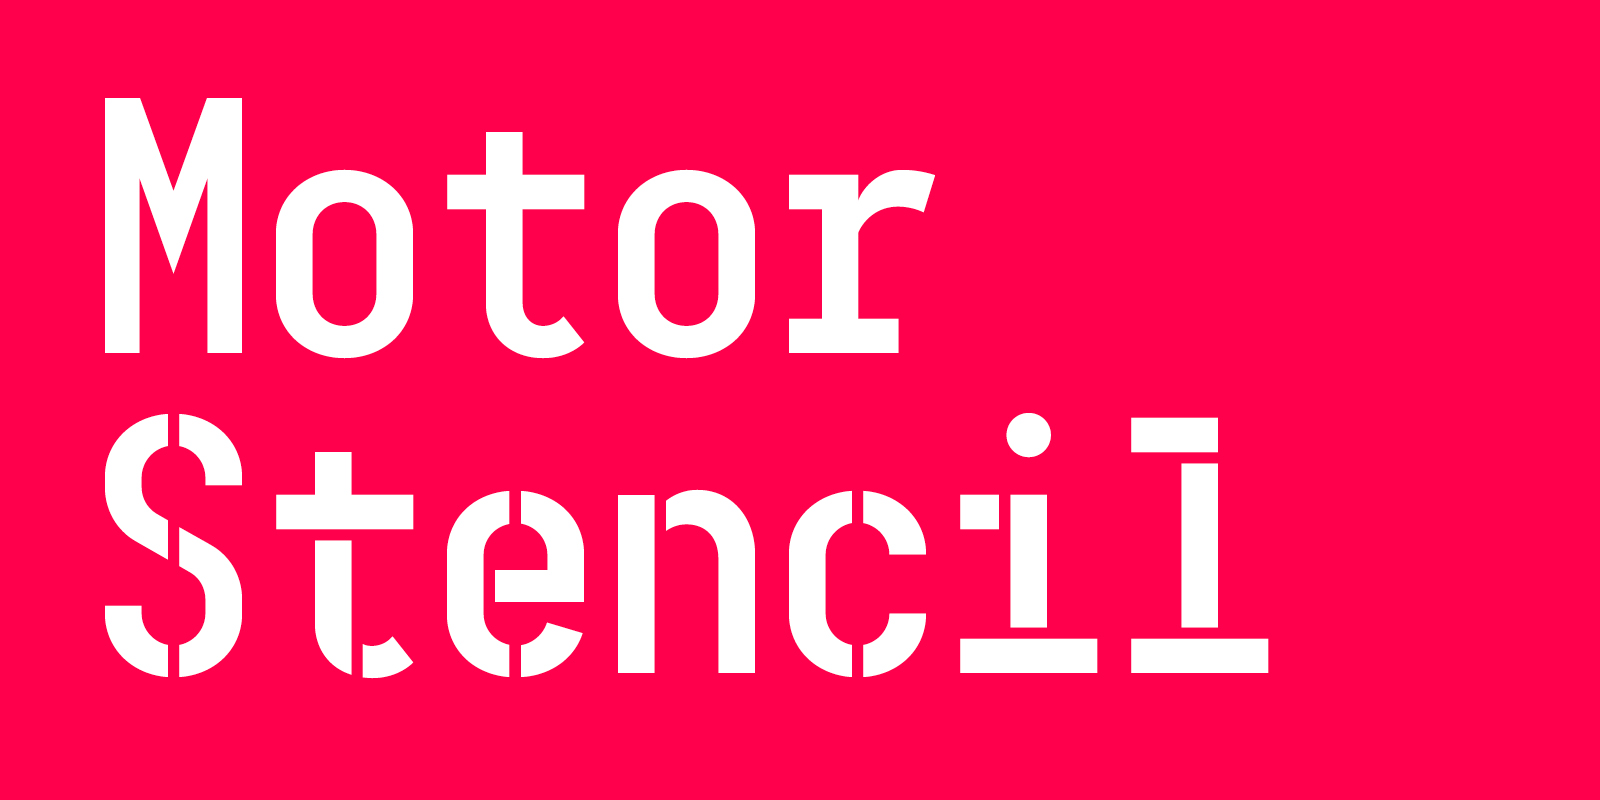 Card displaying Motor typeface in various styles